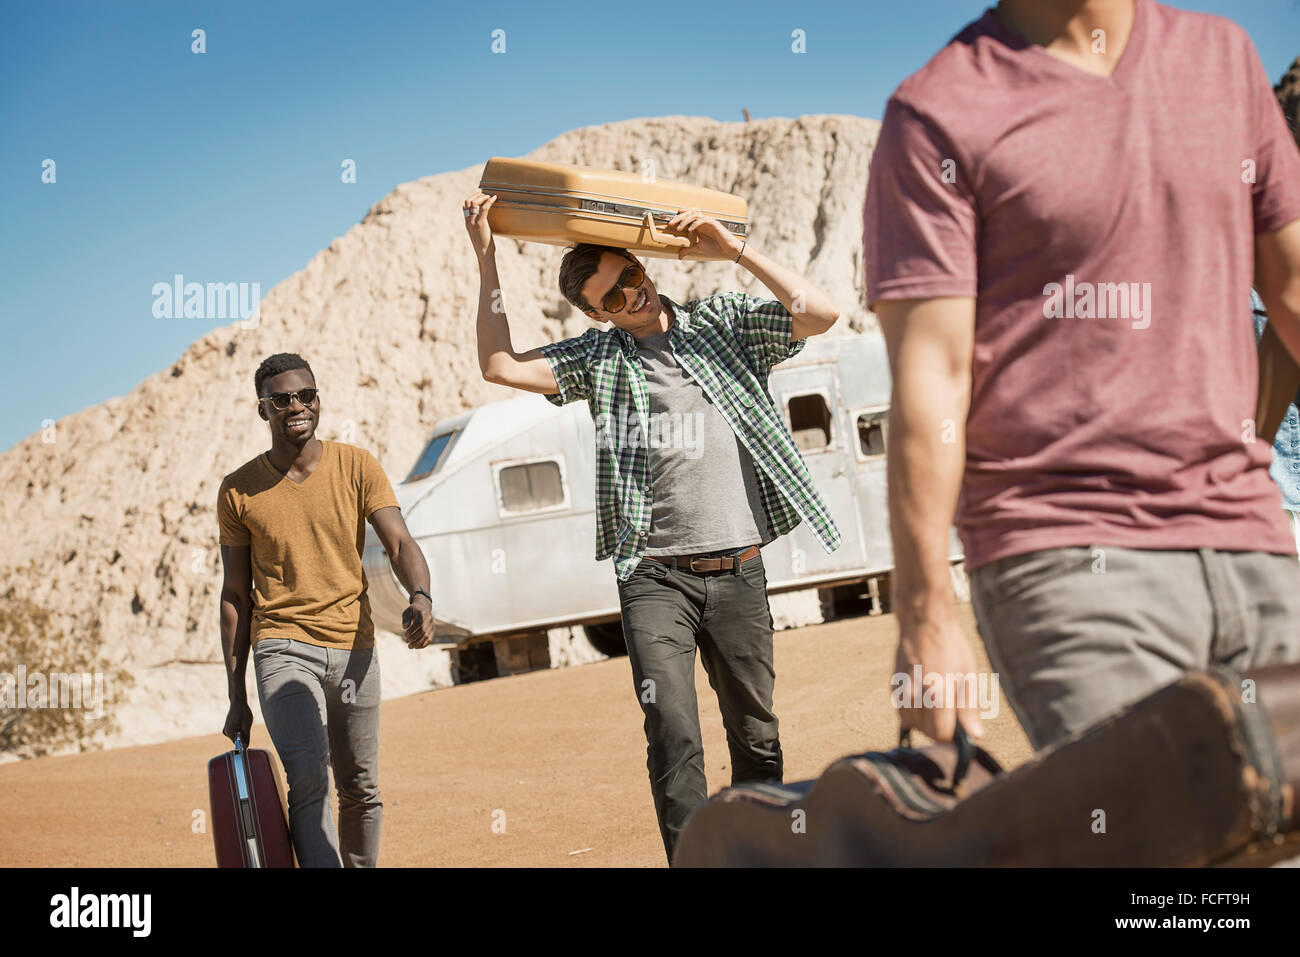 A group of people walking in a line in open desert country, carrying their cases, on a road trip. Stock Photo